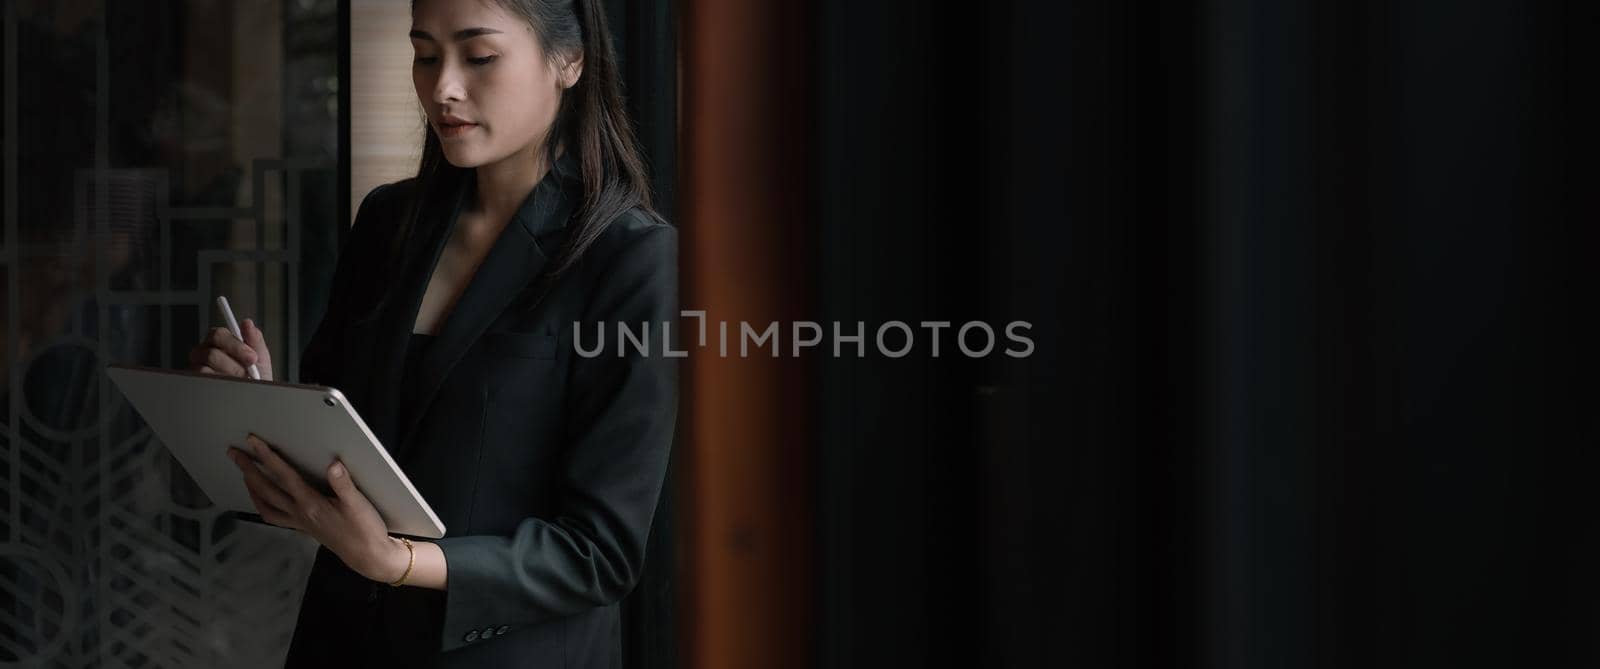 Attractive business asian woman using a digital tablet while standing in front of windows in an office building.